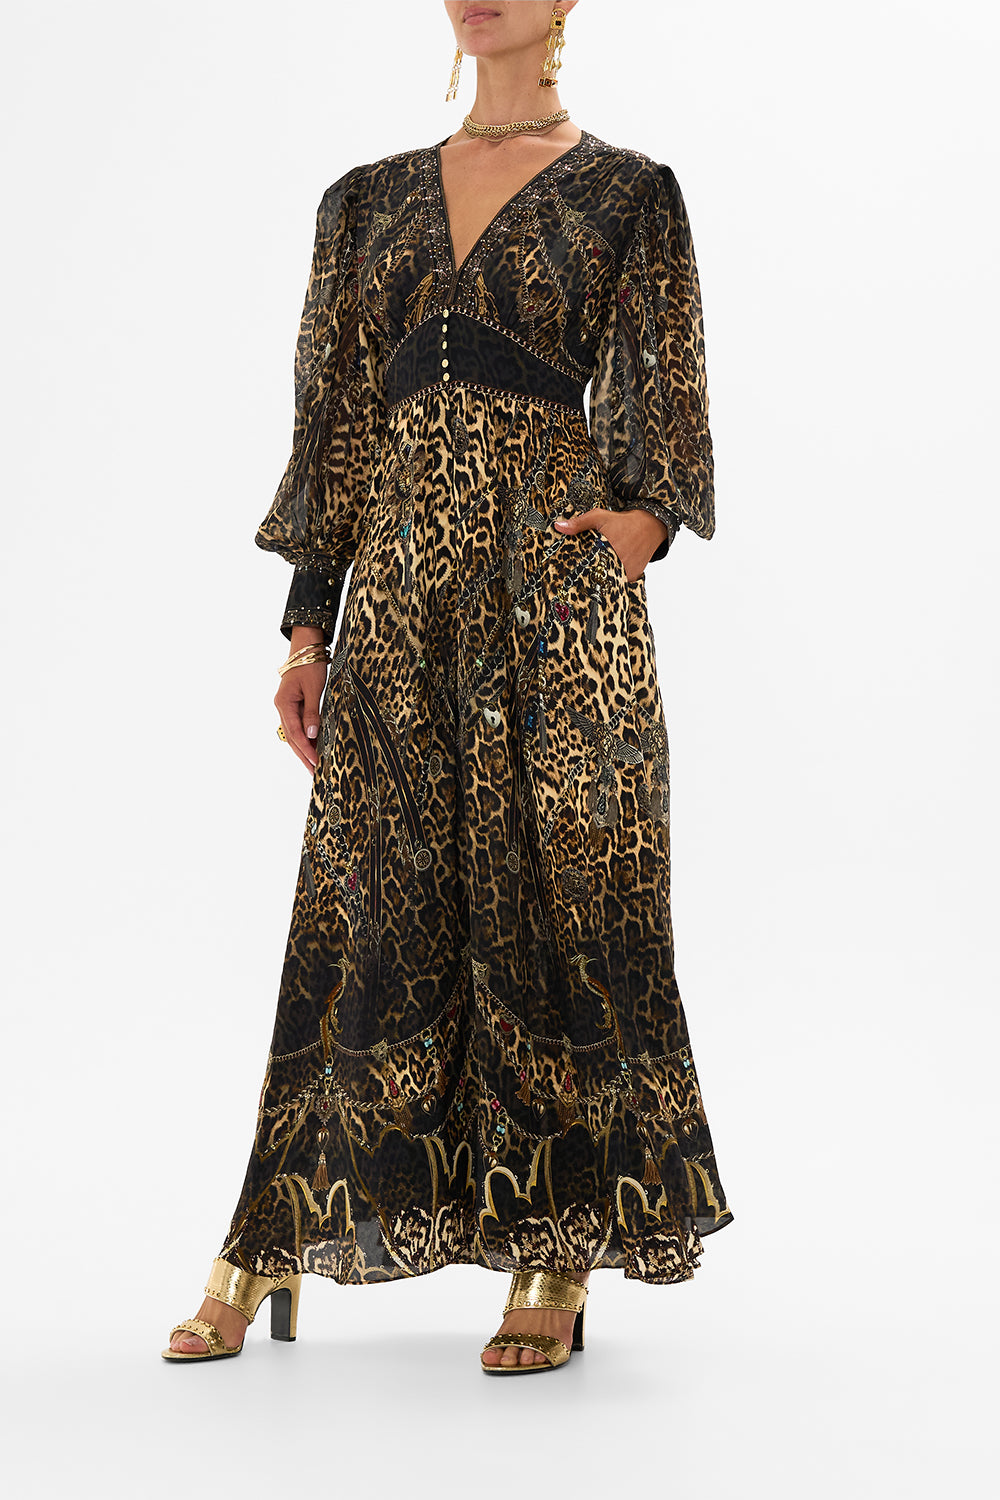 CAMILLA Leopard Shaped Waistband Dress with Gathered Sleeves in Amsterglam